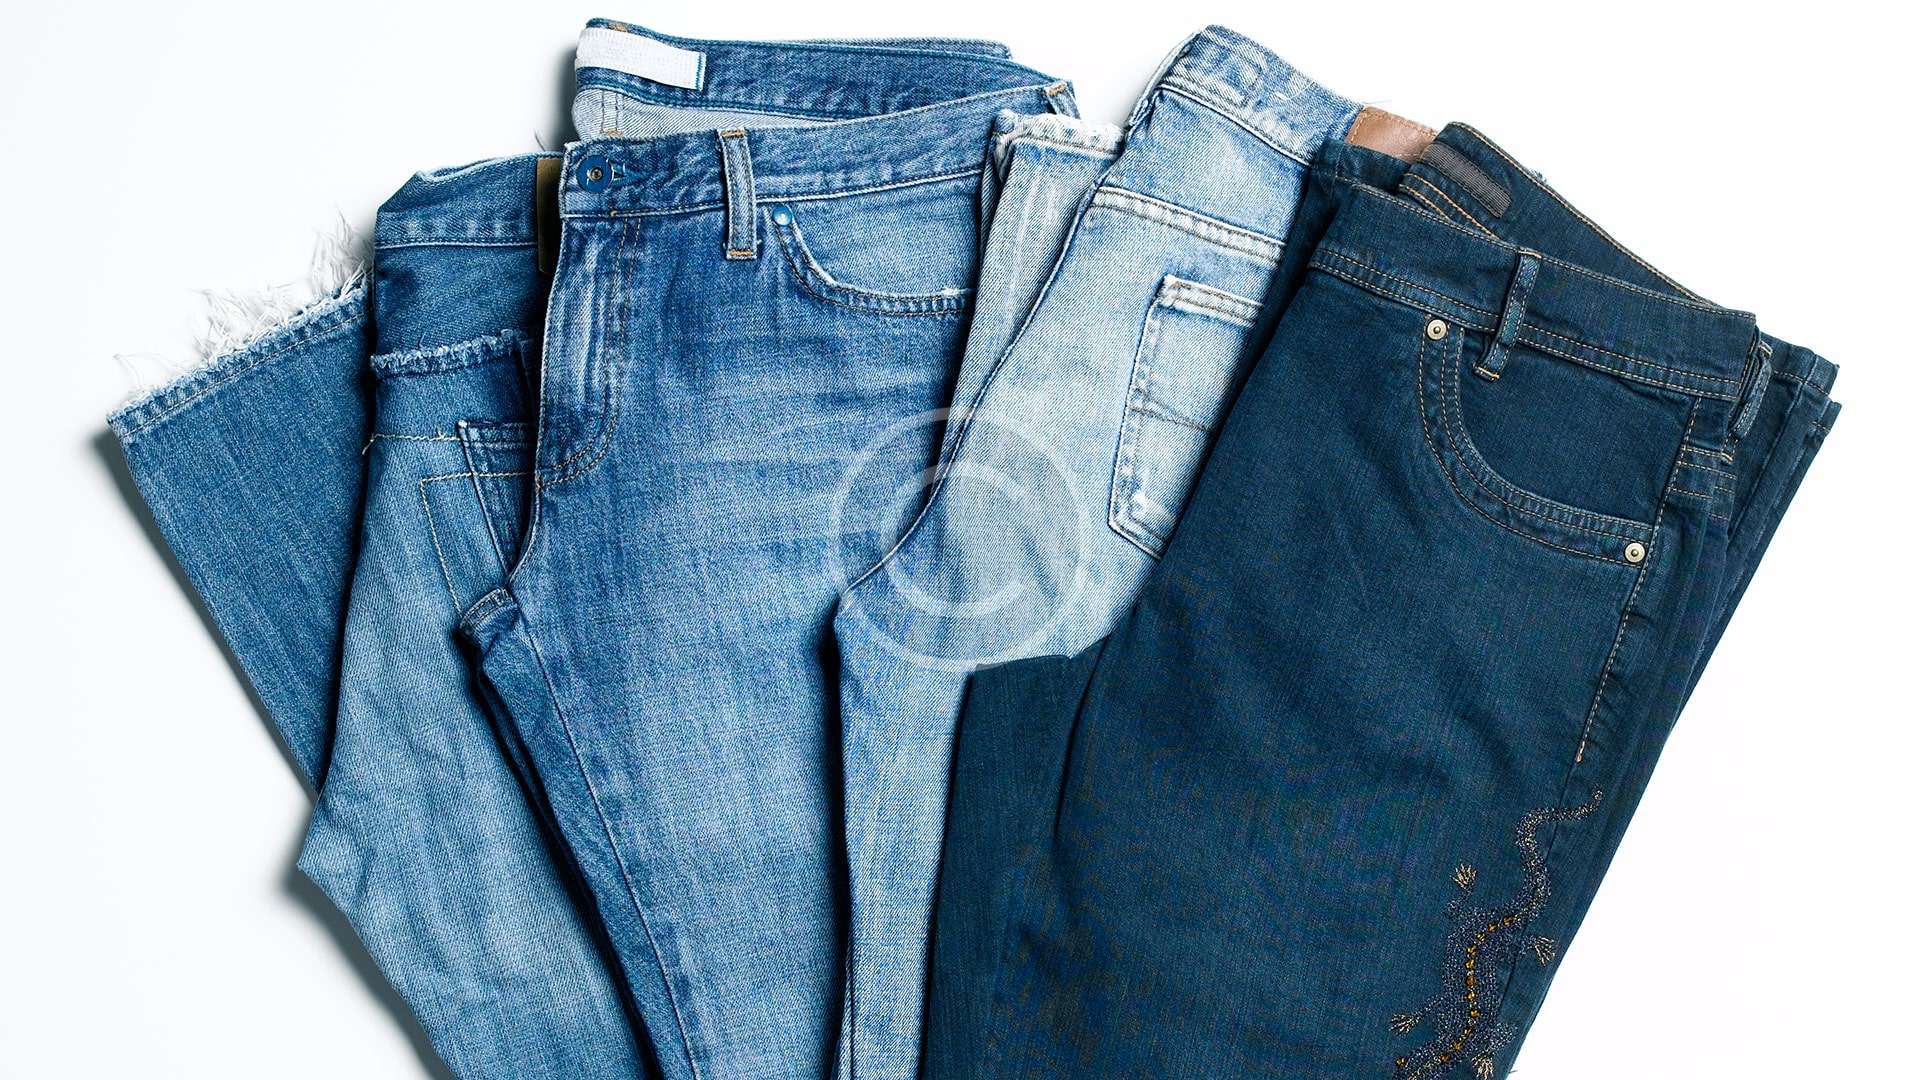 Jeans: how to choose your perfect cut and color